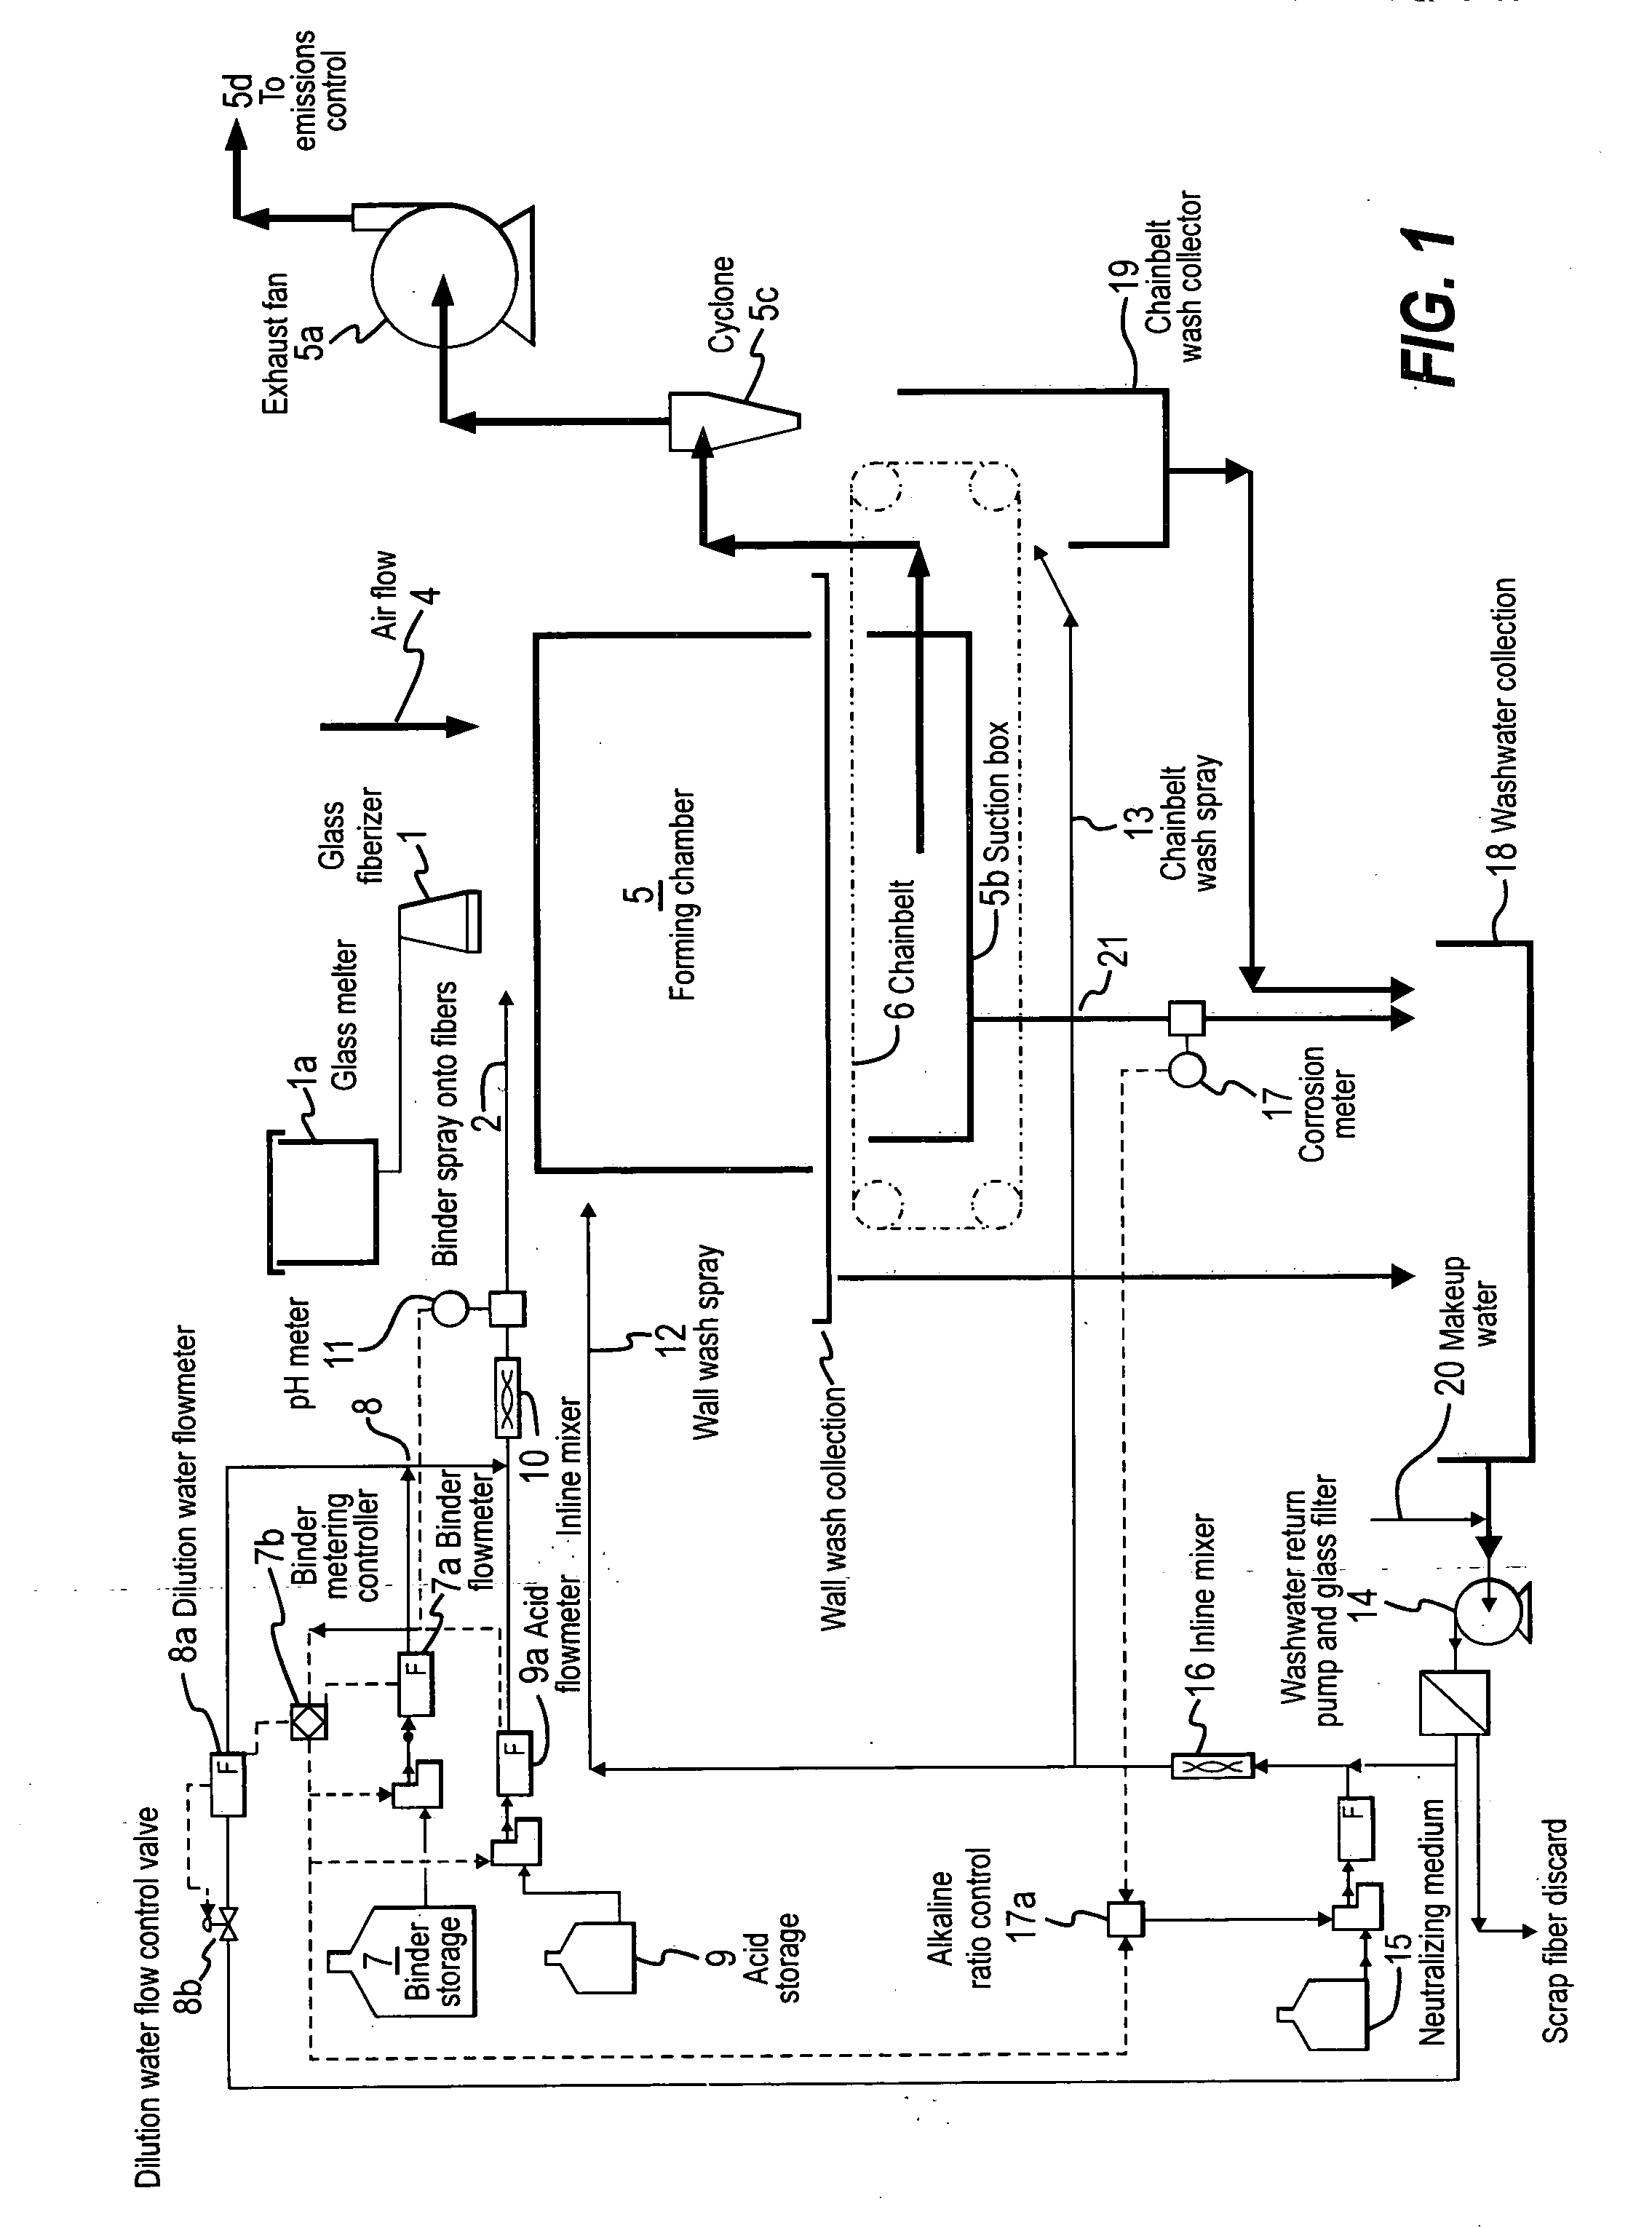 Method for reducing corrosion